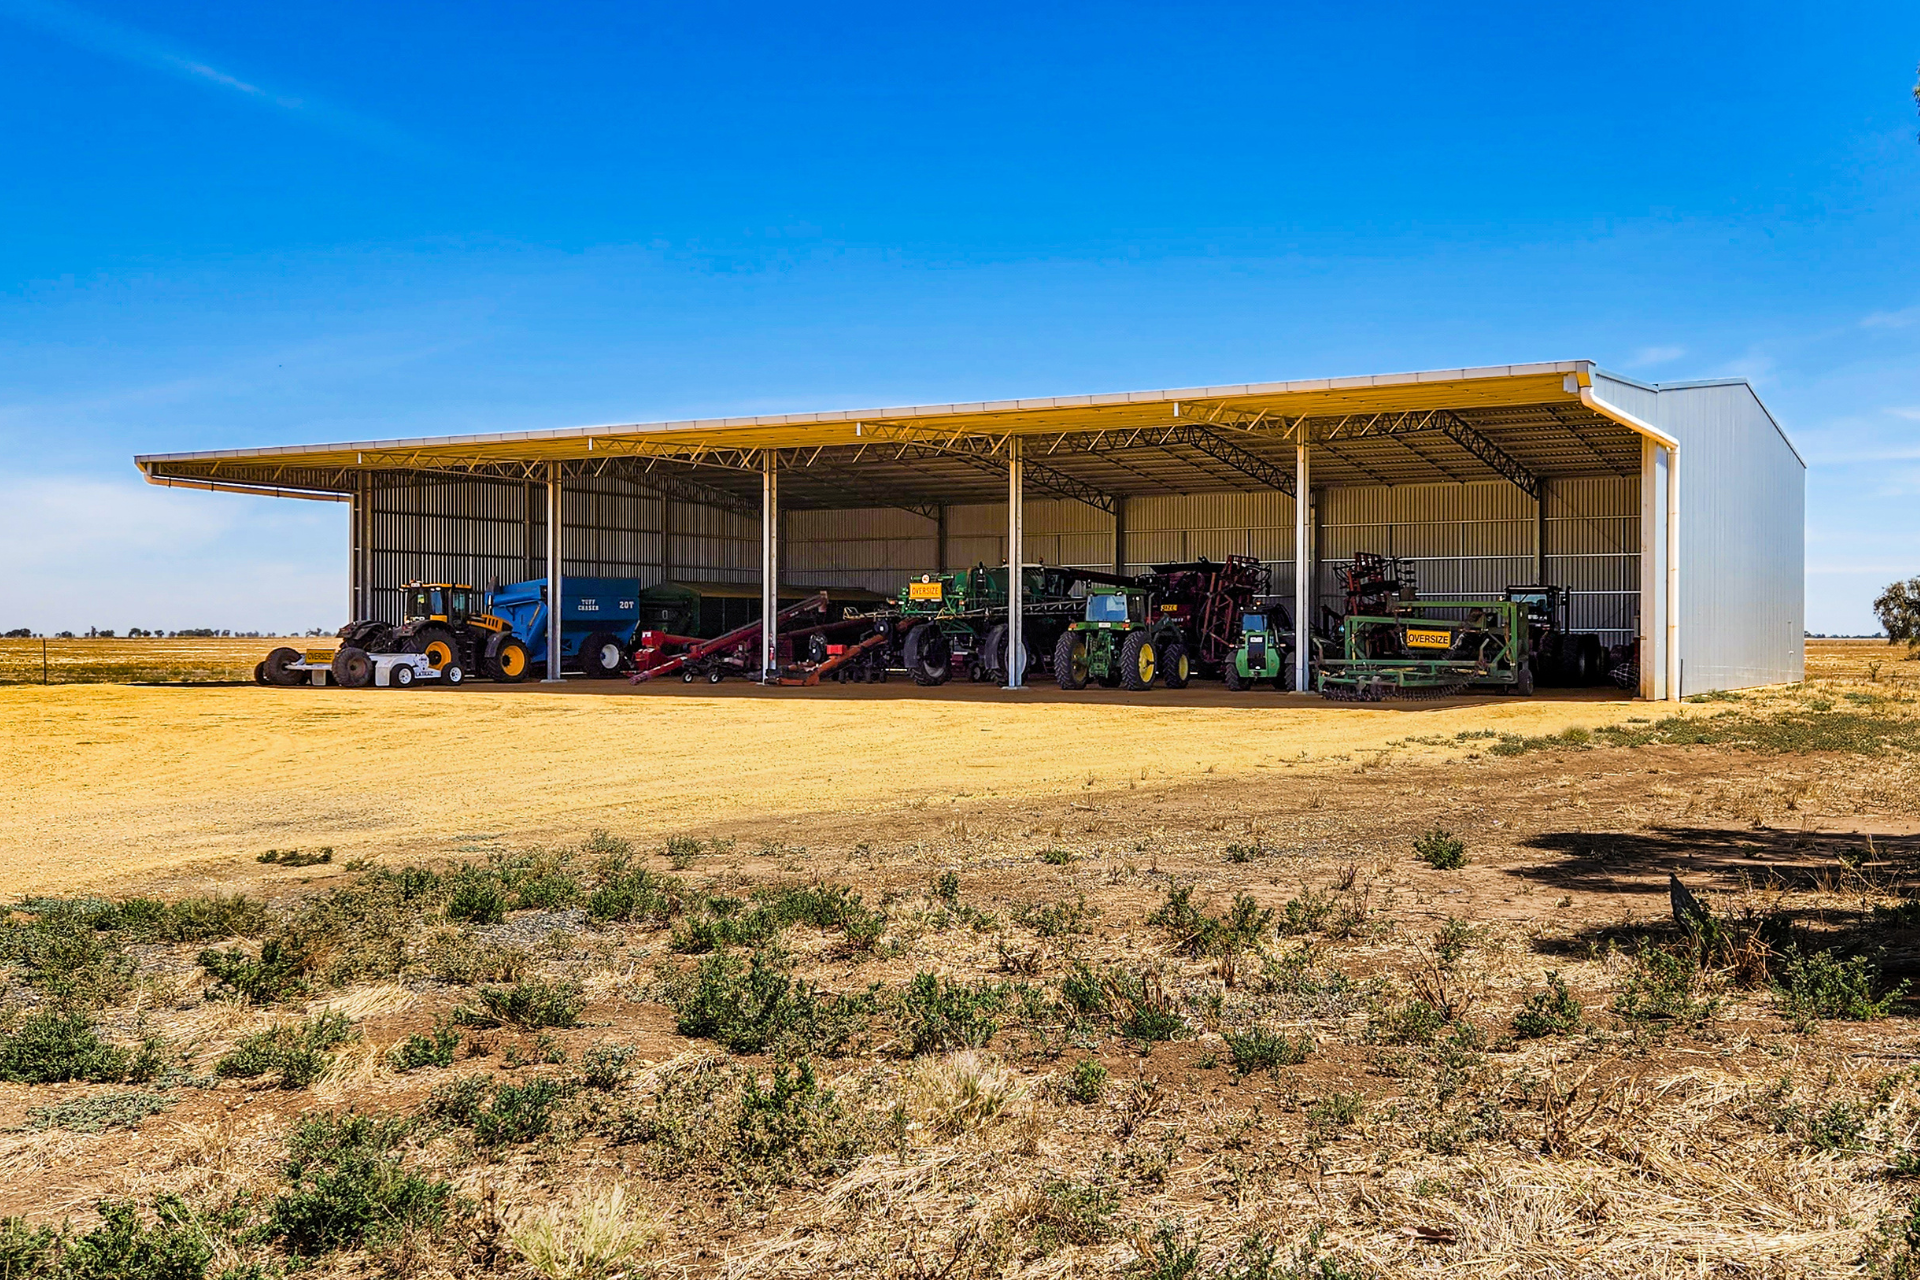 45m x 24m x 7.5m machinery shed with 8m canopy at Minyip VIC (1)